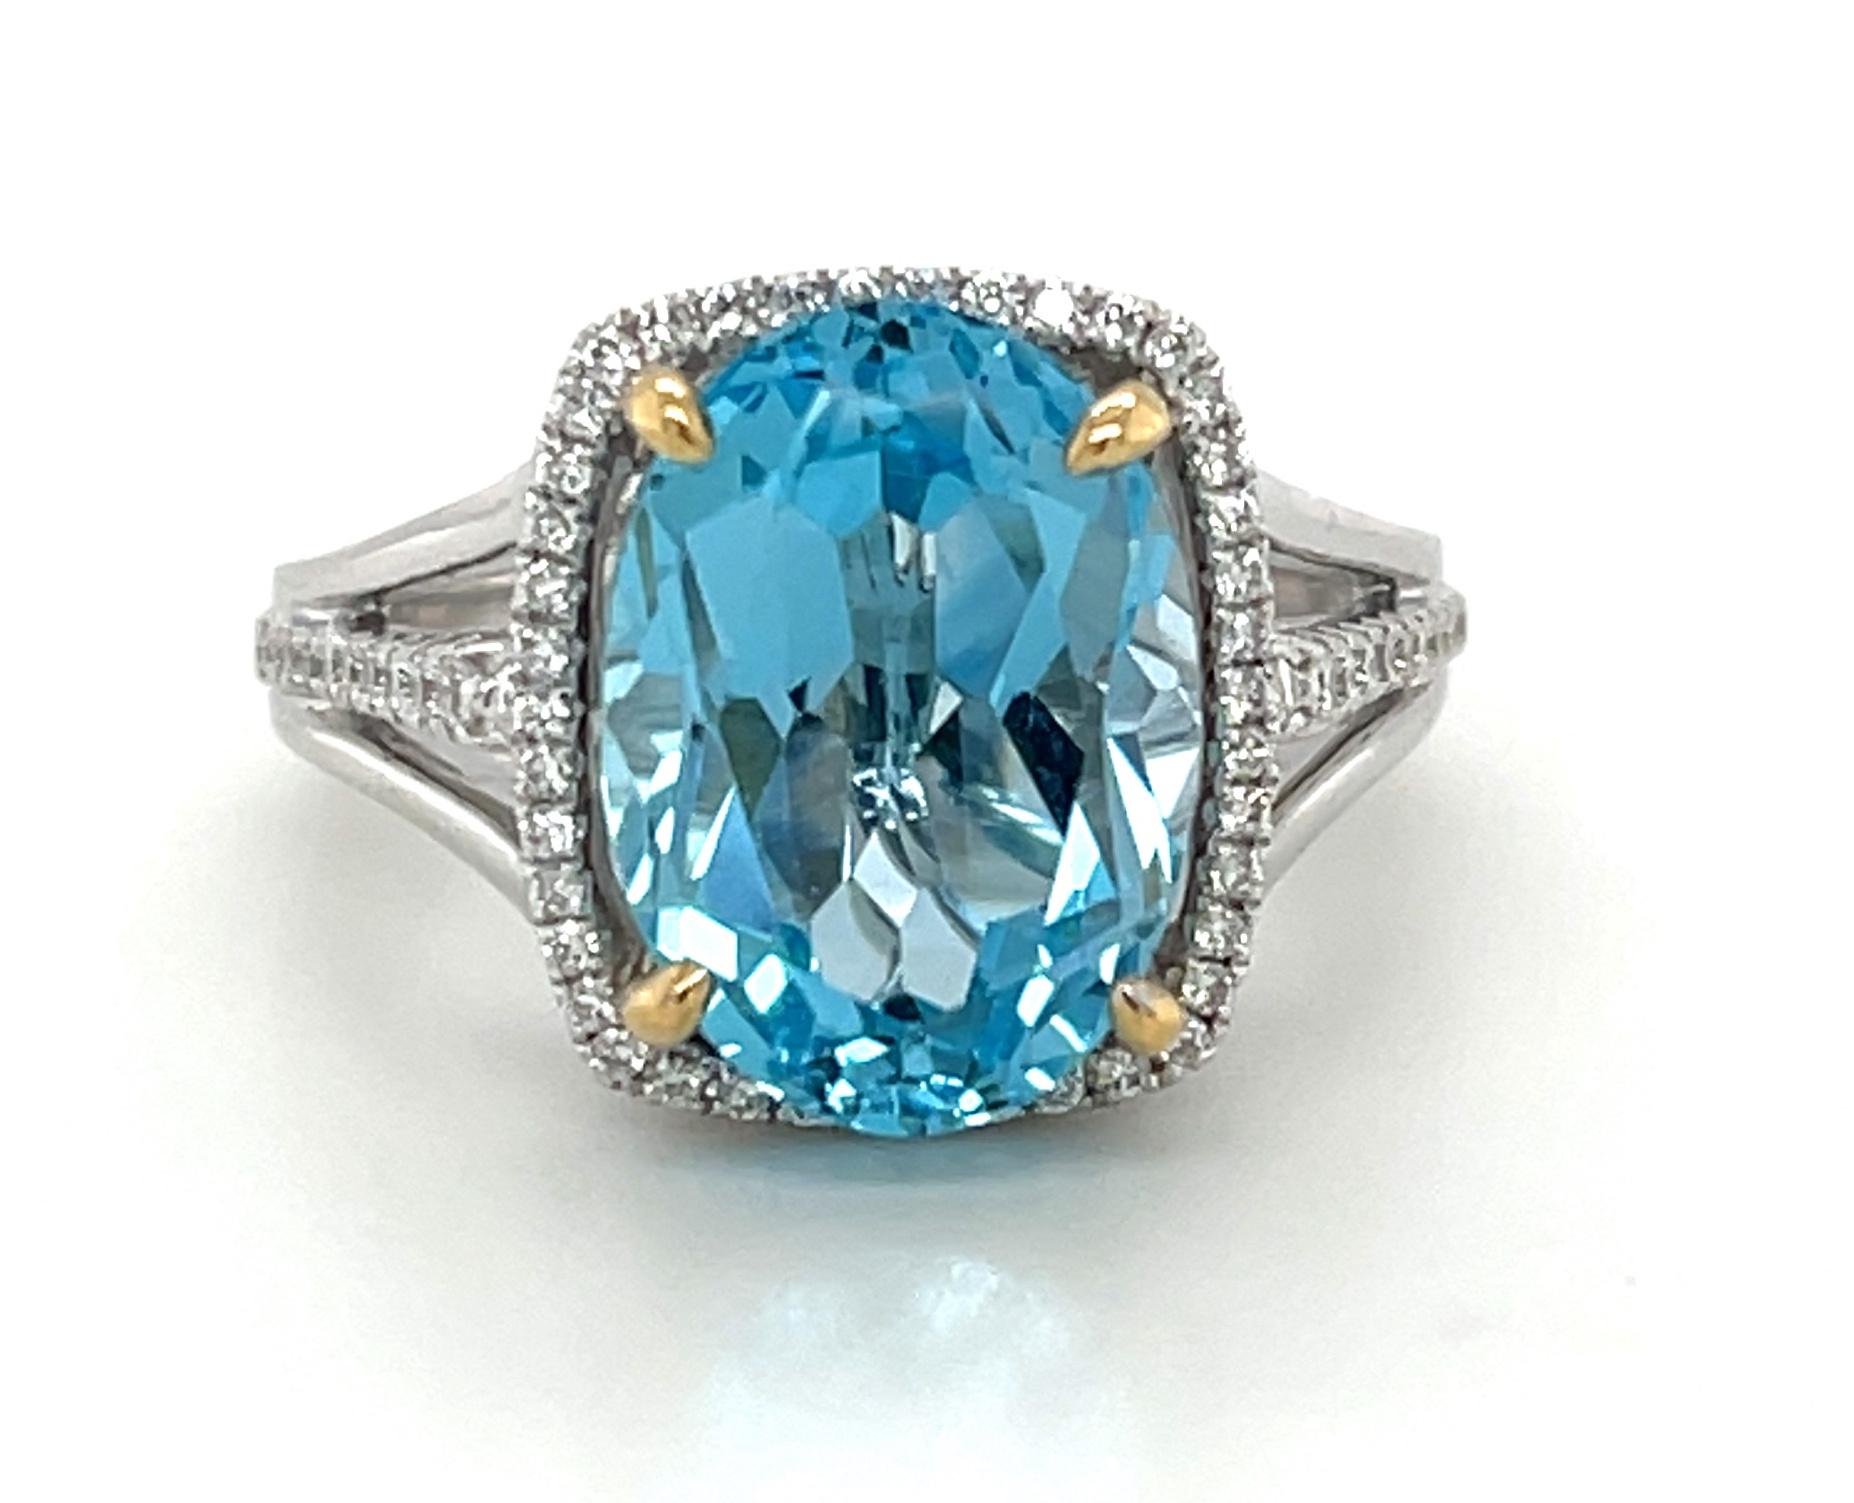 This stunning cocktail ring features a beautiful 8.59 carat oval blue topaz set in a gorgeous 18k gold mounting. The sparkling Swiss blue topaz has been set with 18k yellow gold prongs which not only highlight the center stone but provide lovely